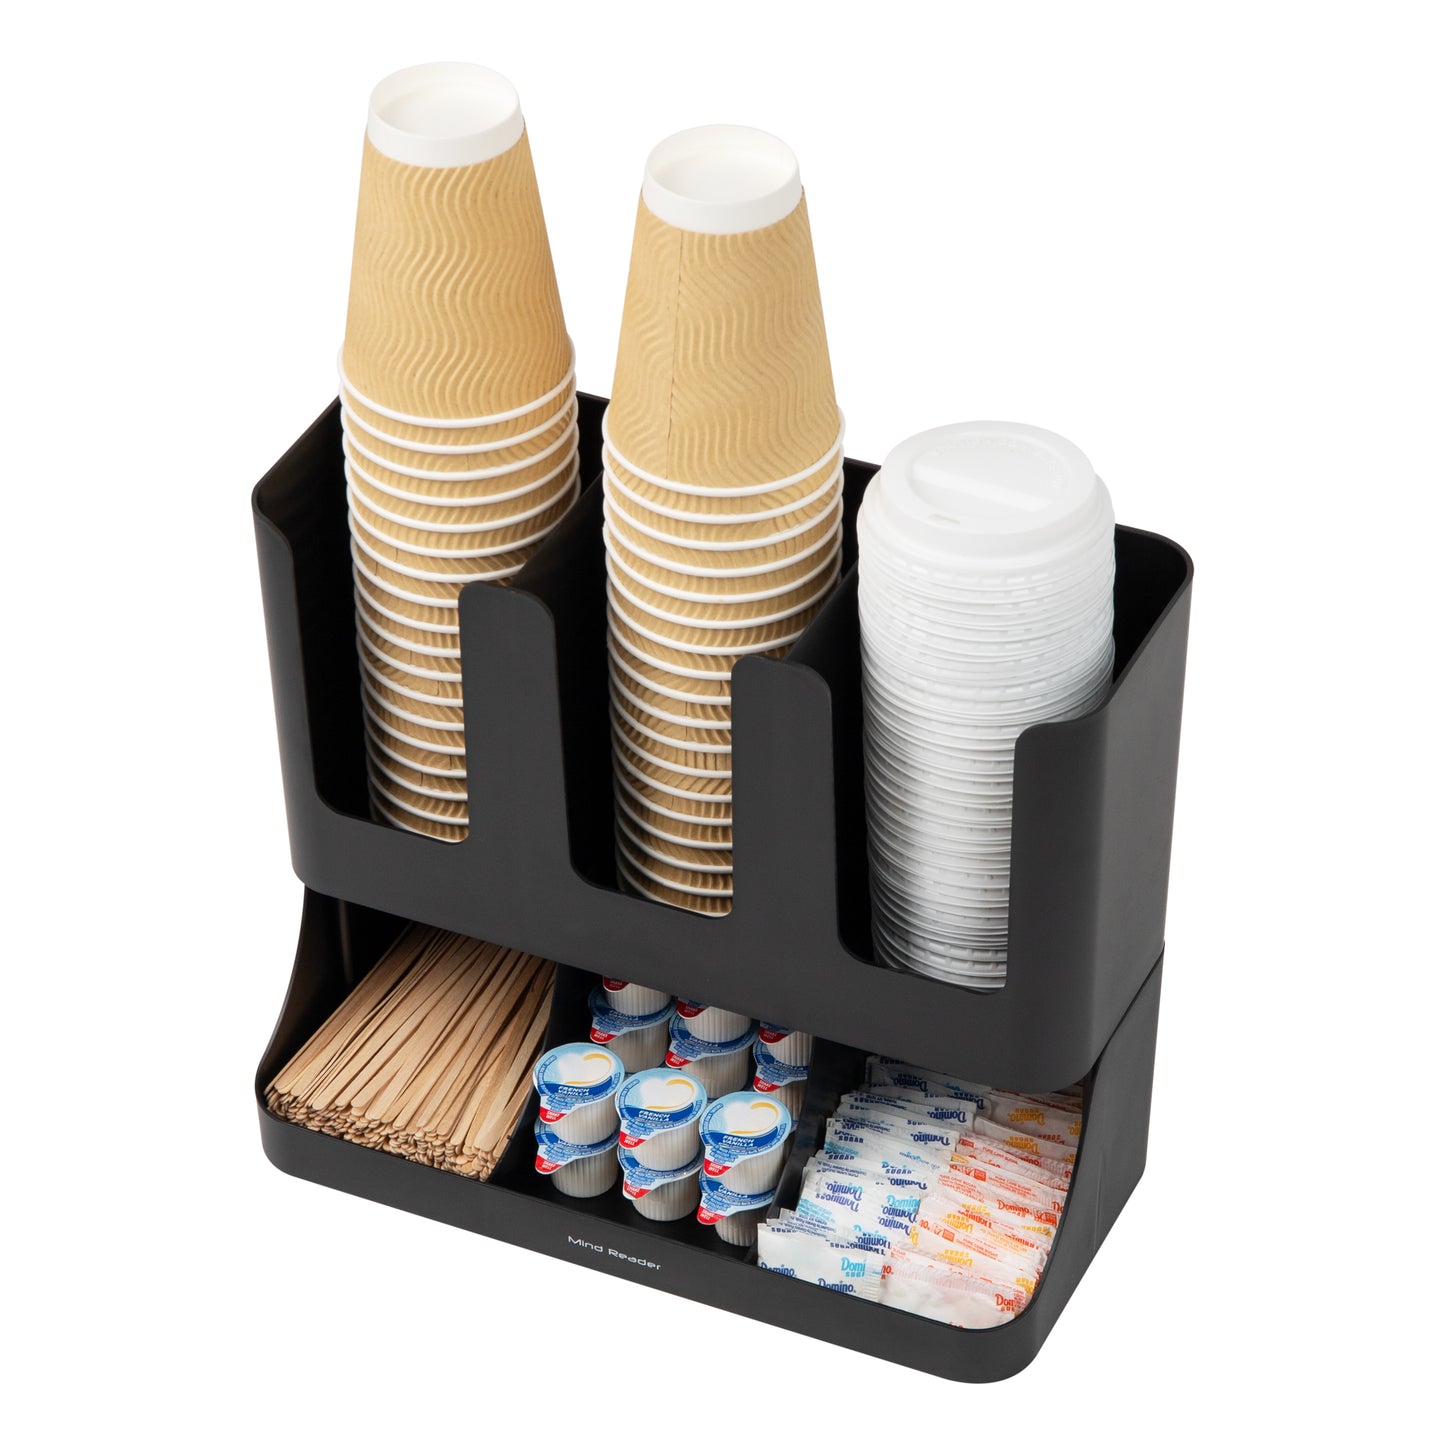 Mind Reader Anchor Collection, 6-Compartment, 2-Tier Coffee Cup and Condiment Organizer